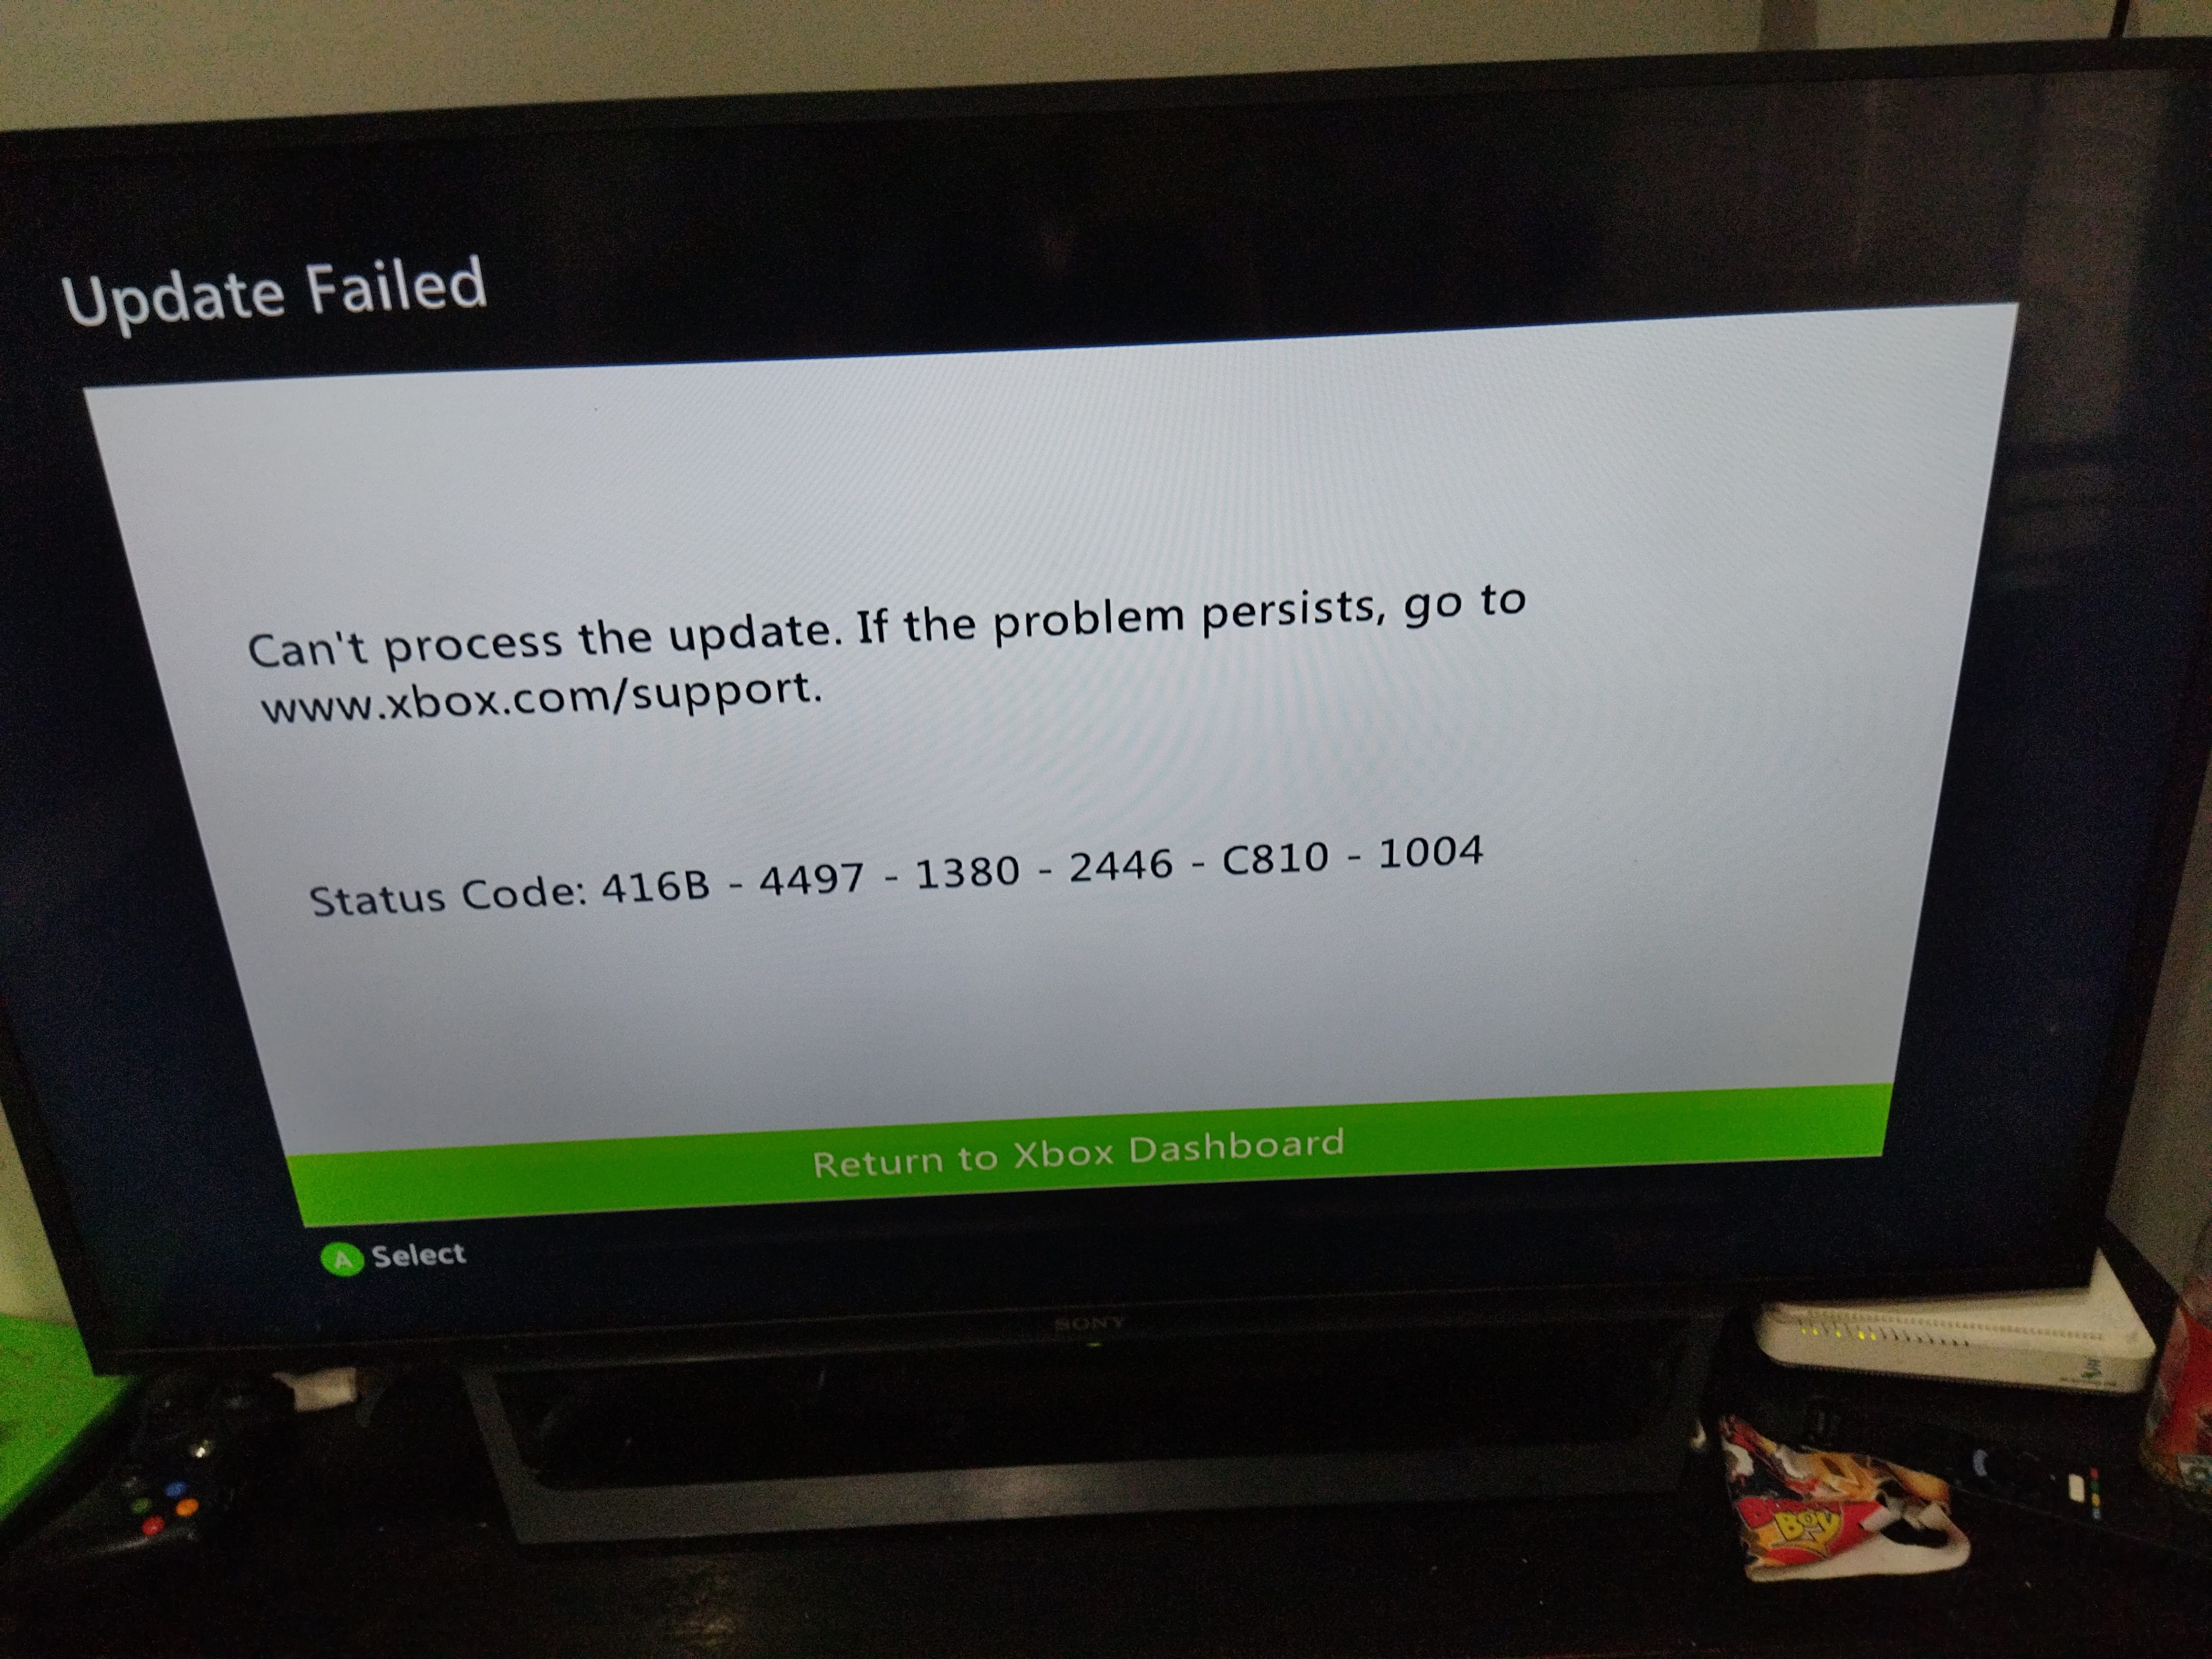 Succes Romanschrijver Viool My xbox 360 can't process. If the problem persists - Microsoft Community